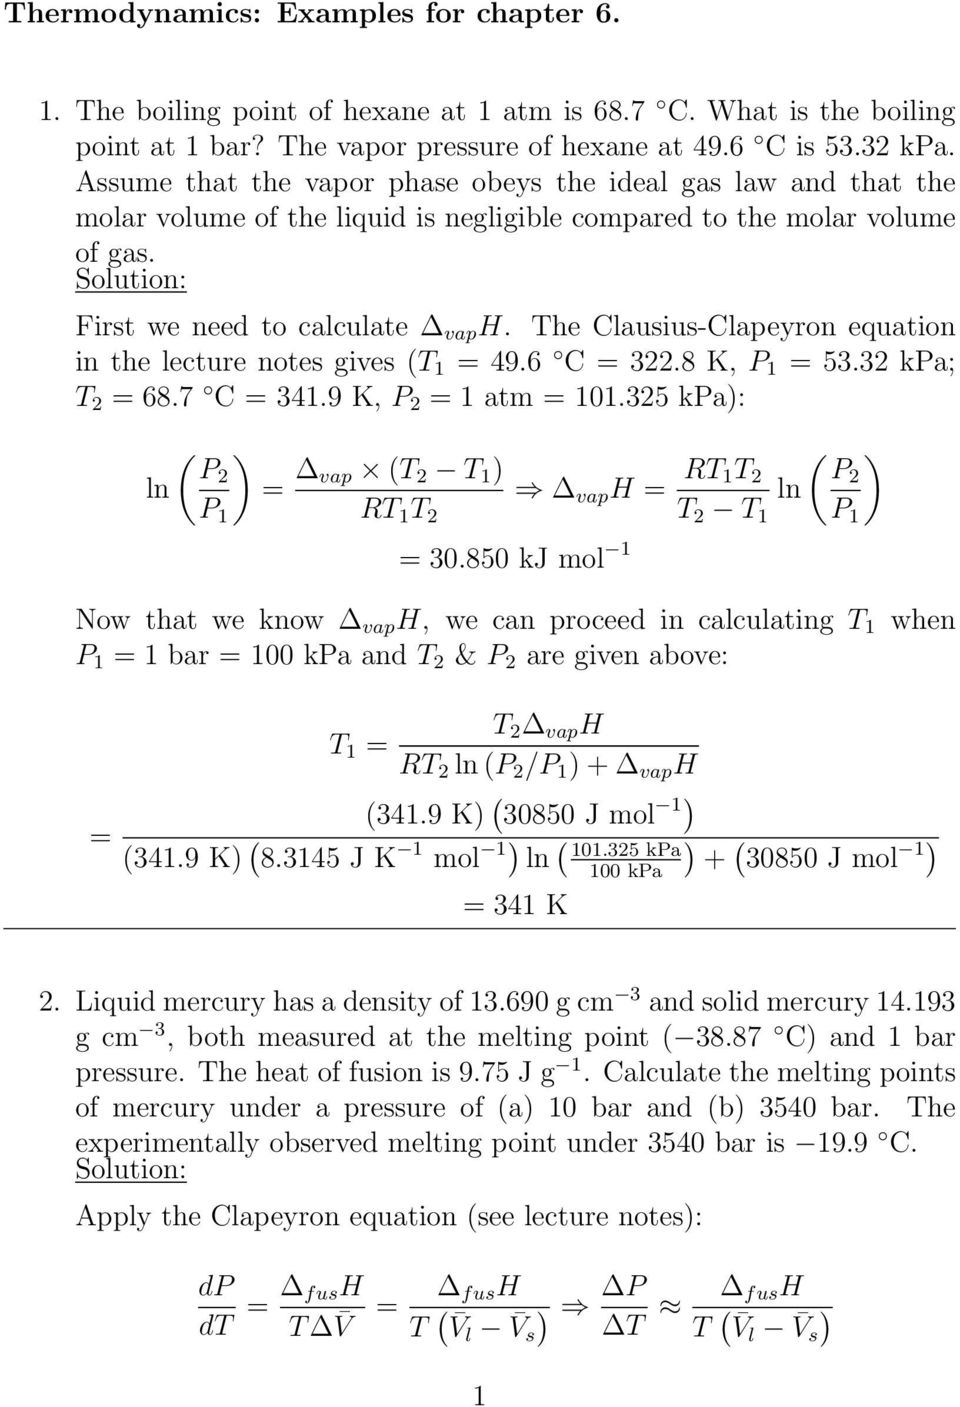 The Clausius-Clapeyron equation in the lecture notes gives T 1 = 49.6 C = 322.8 K, P 1 = 53.32 kpa; T 2 = 68.7 C = 341.9 K, P 2 = 1 atm = 101.